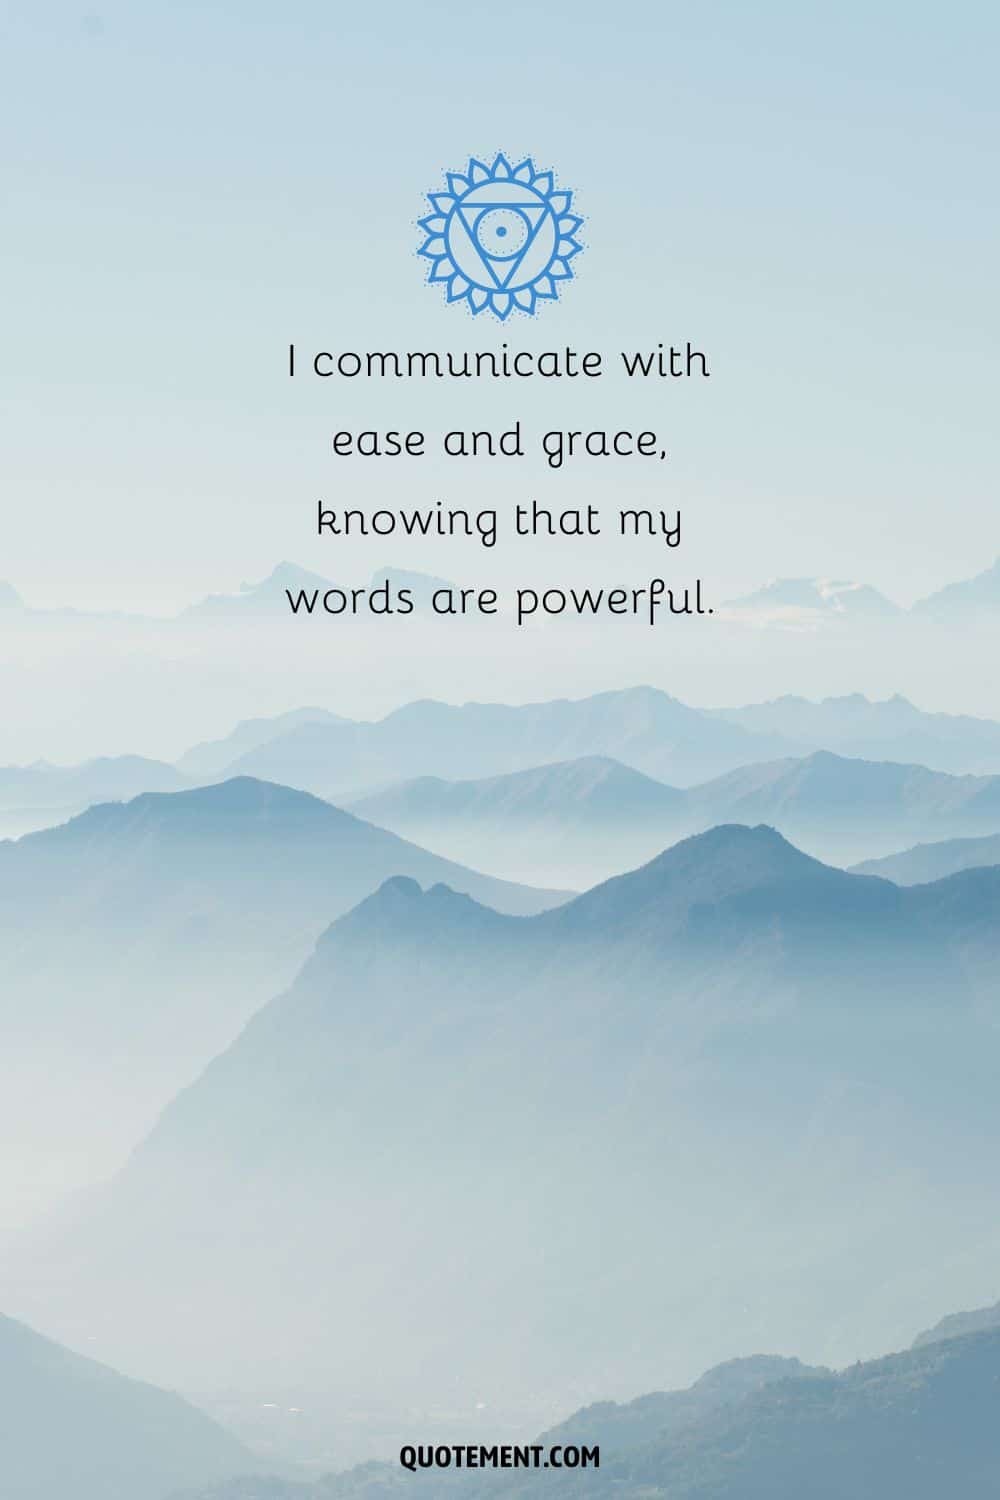 “I communicate with ease and grace, knowing that my words are powerful.”